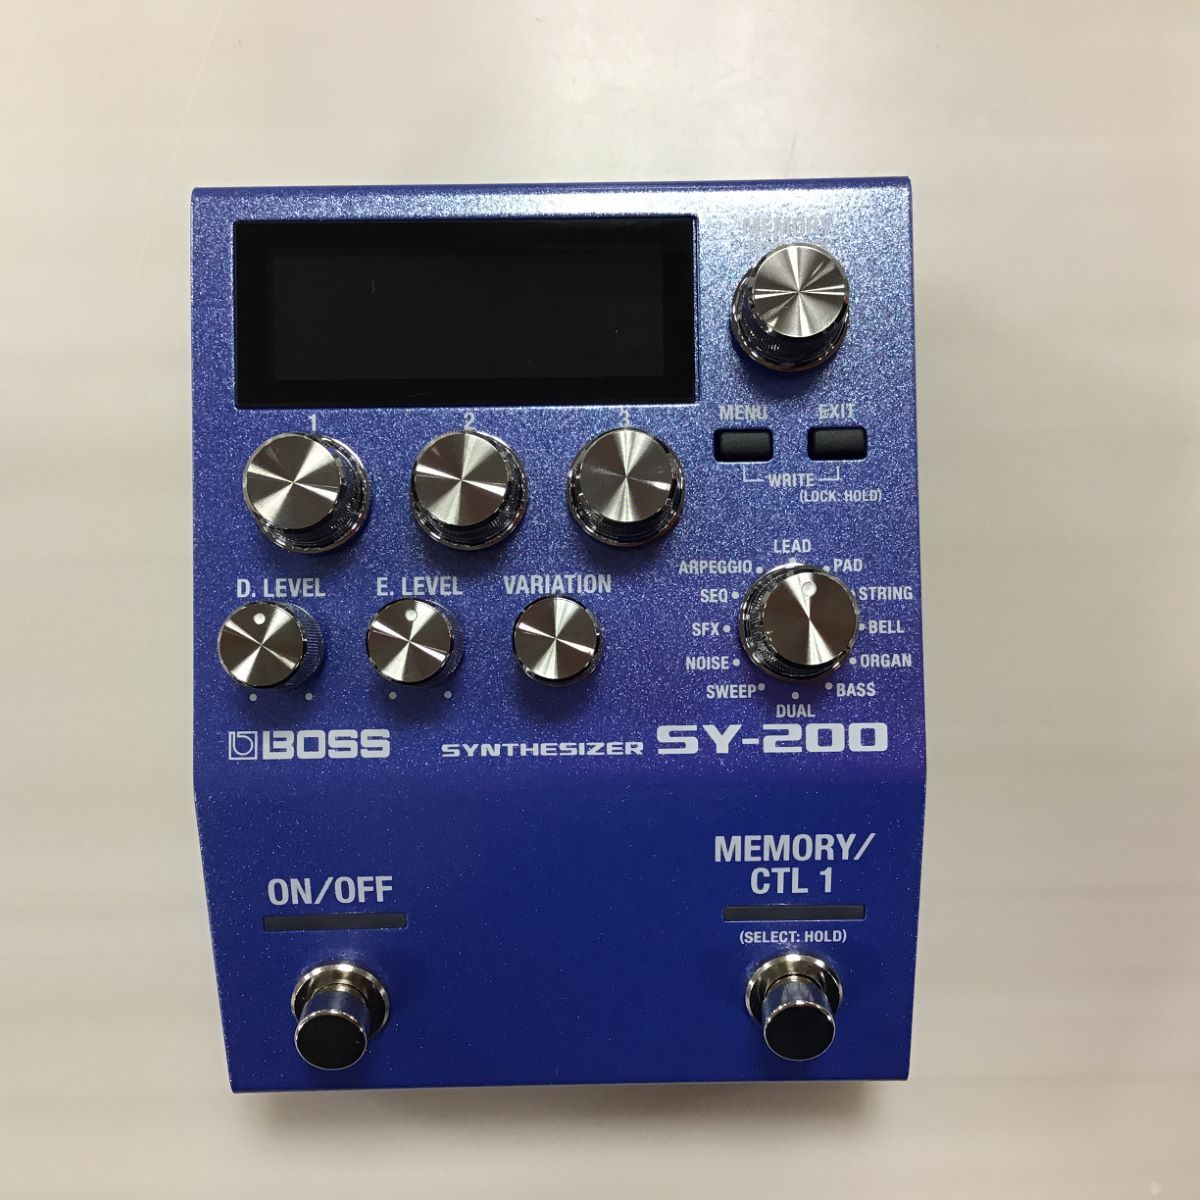 BOSS（楽器、器材） BOSS SY-200 Synthesizer ギターシンセサイザー